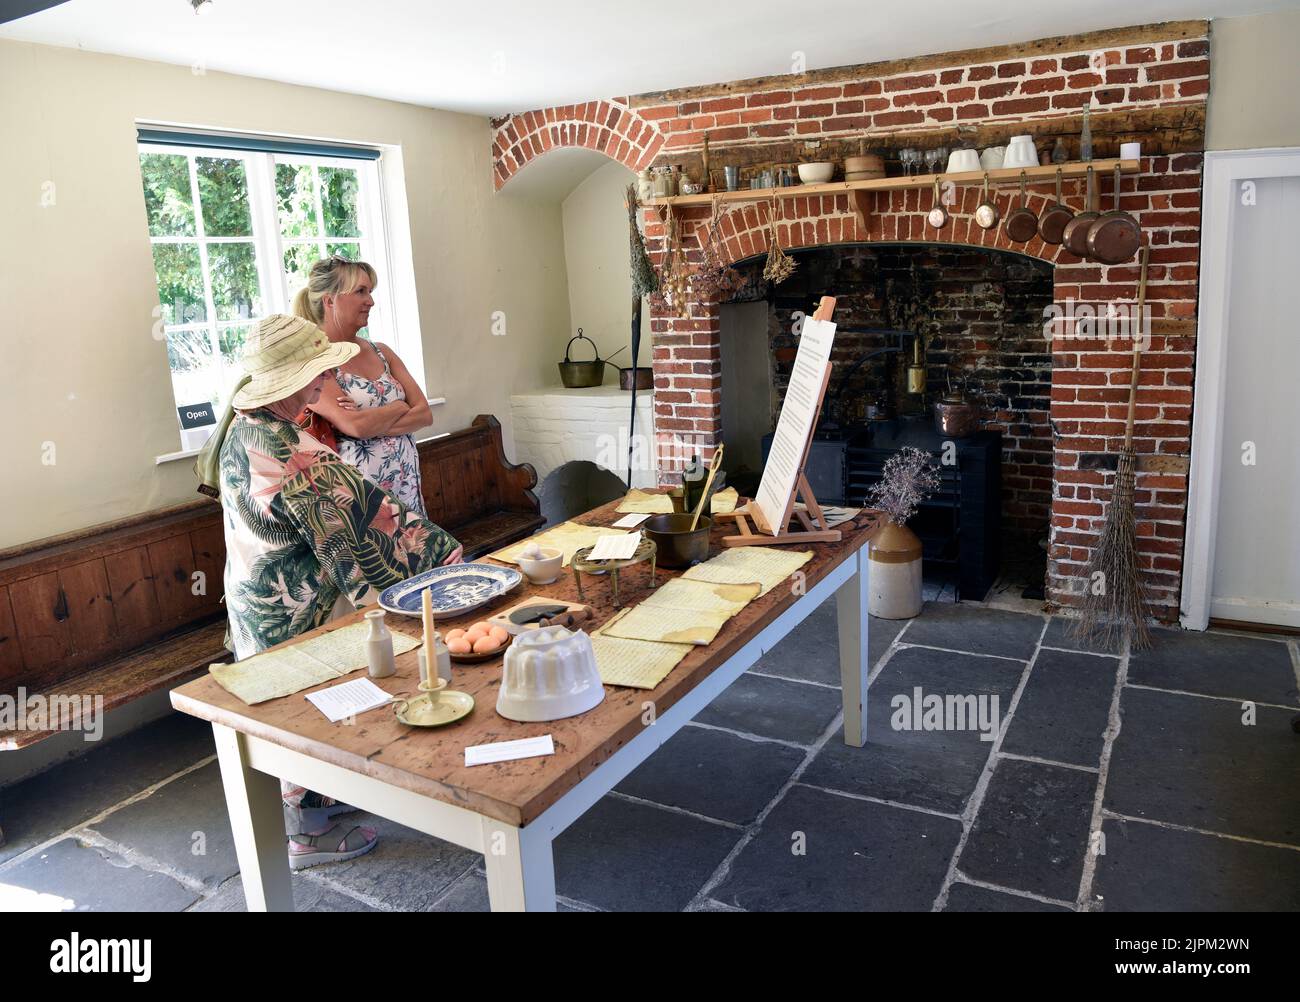 Visitors to Jane Austen’s House perusing items on display in the kitchen, Chawton, near Alton, Hampshire, UK. Stock Photo